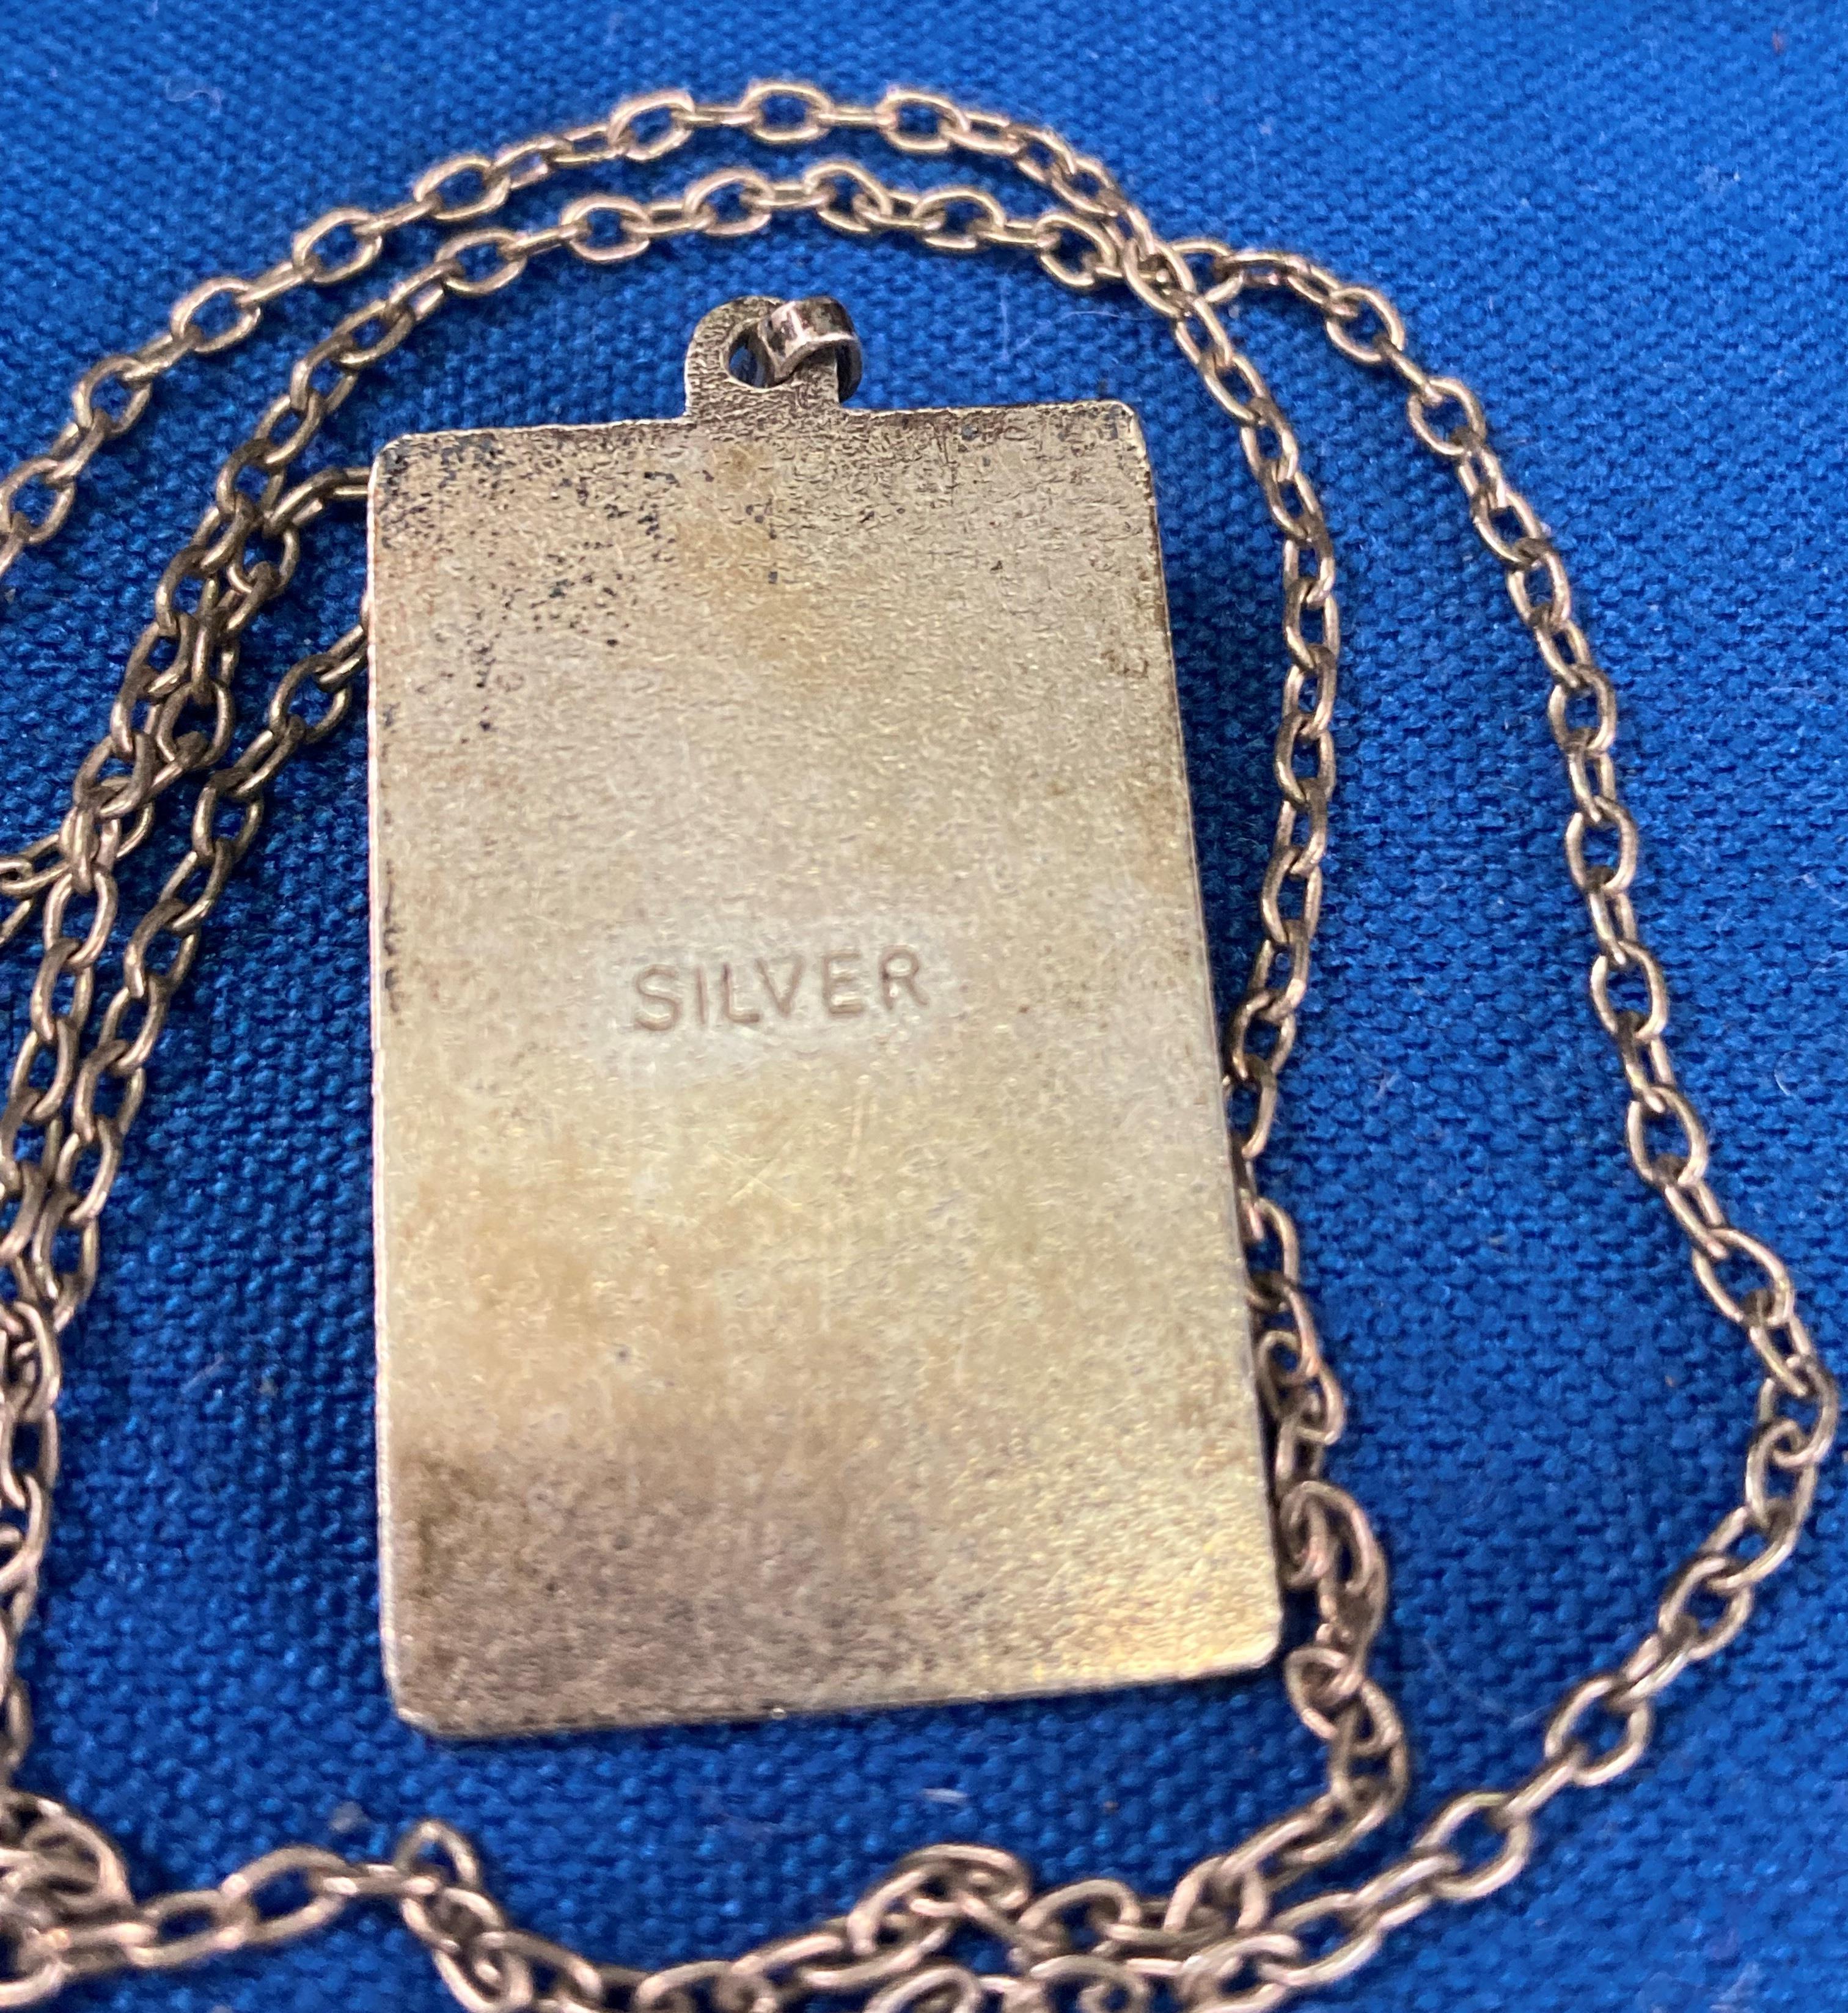 Four assorted silver (hallmark) chains and pendants including silver ingot, - Image 5 of 6